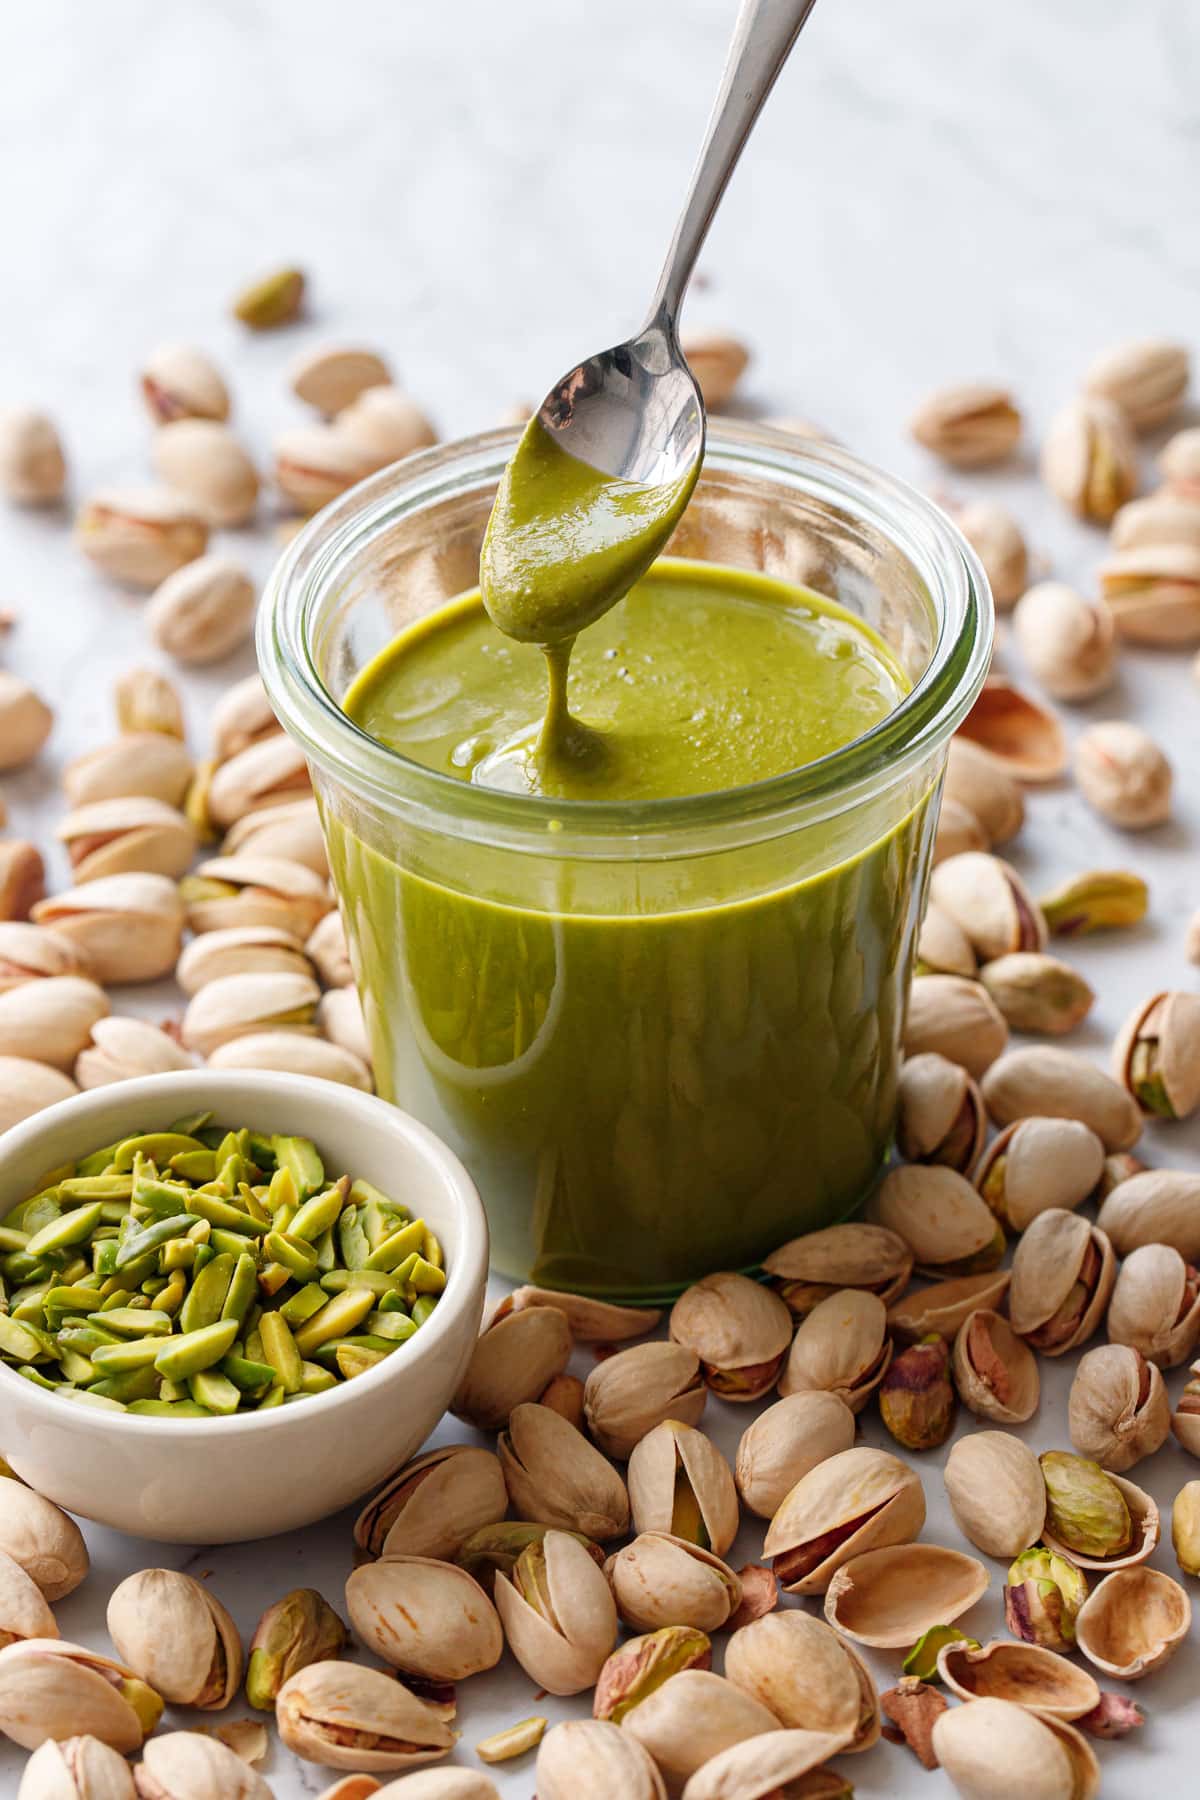 Glass jar with bright green Homemade Pistachio Butter, a spoonful lifting to show the creamy texture, with slivered and shell pistachios scattered around.